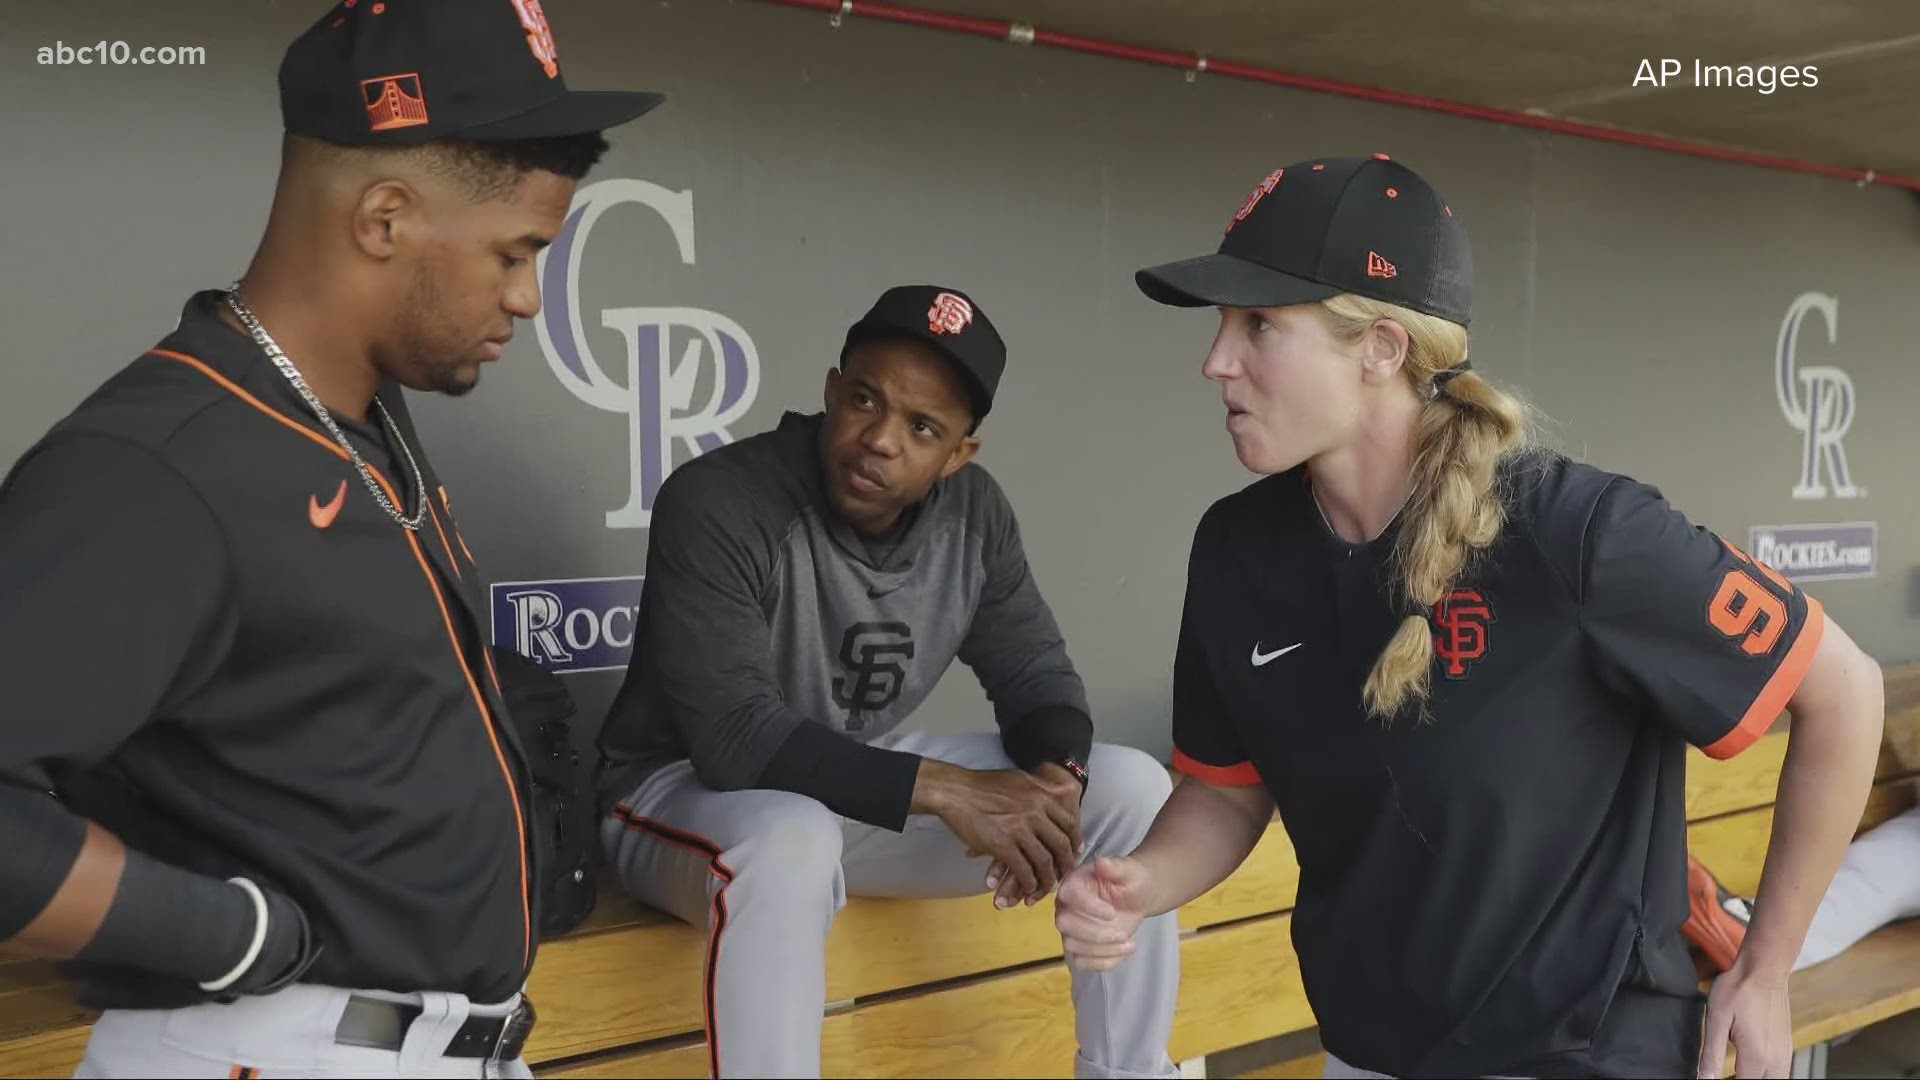 Woodland native and Sacramento State alum Alyssa Nakken was with the Giants during spring training and is still excited for the season.